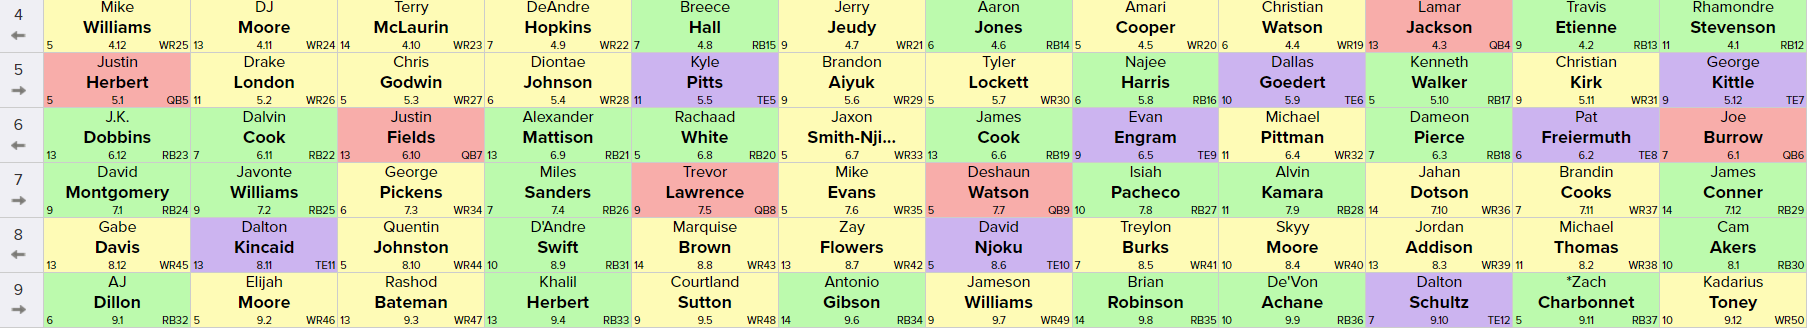 Reviewing an early FFPC Main Event draft - by Ben Gretch